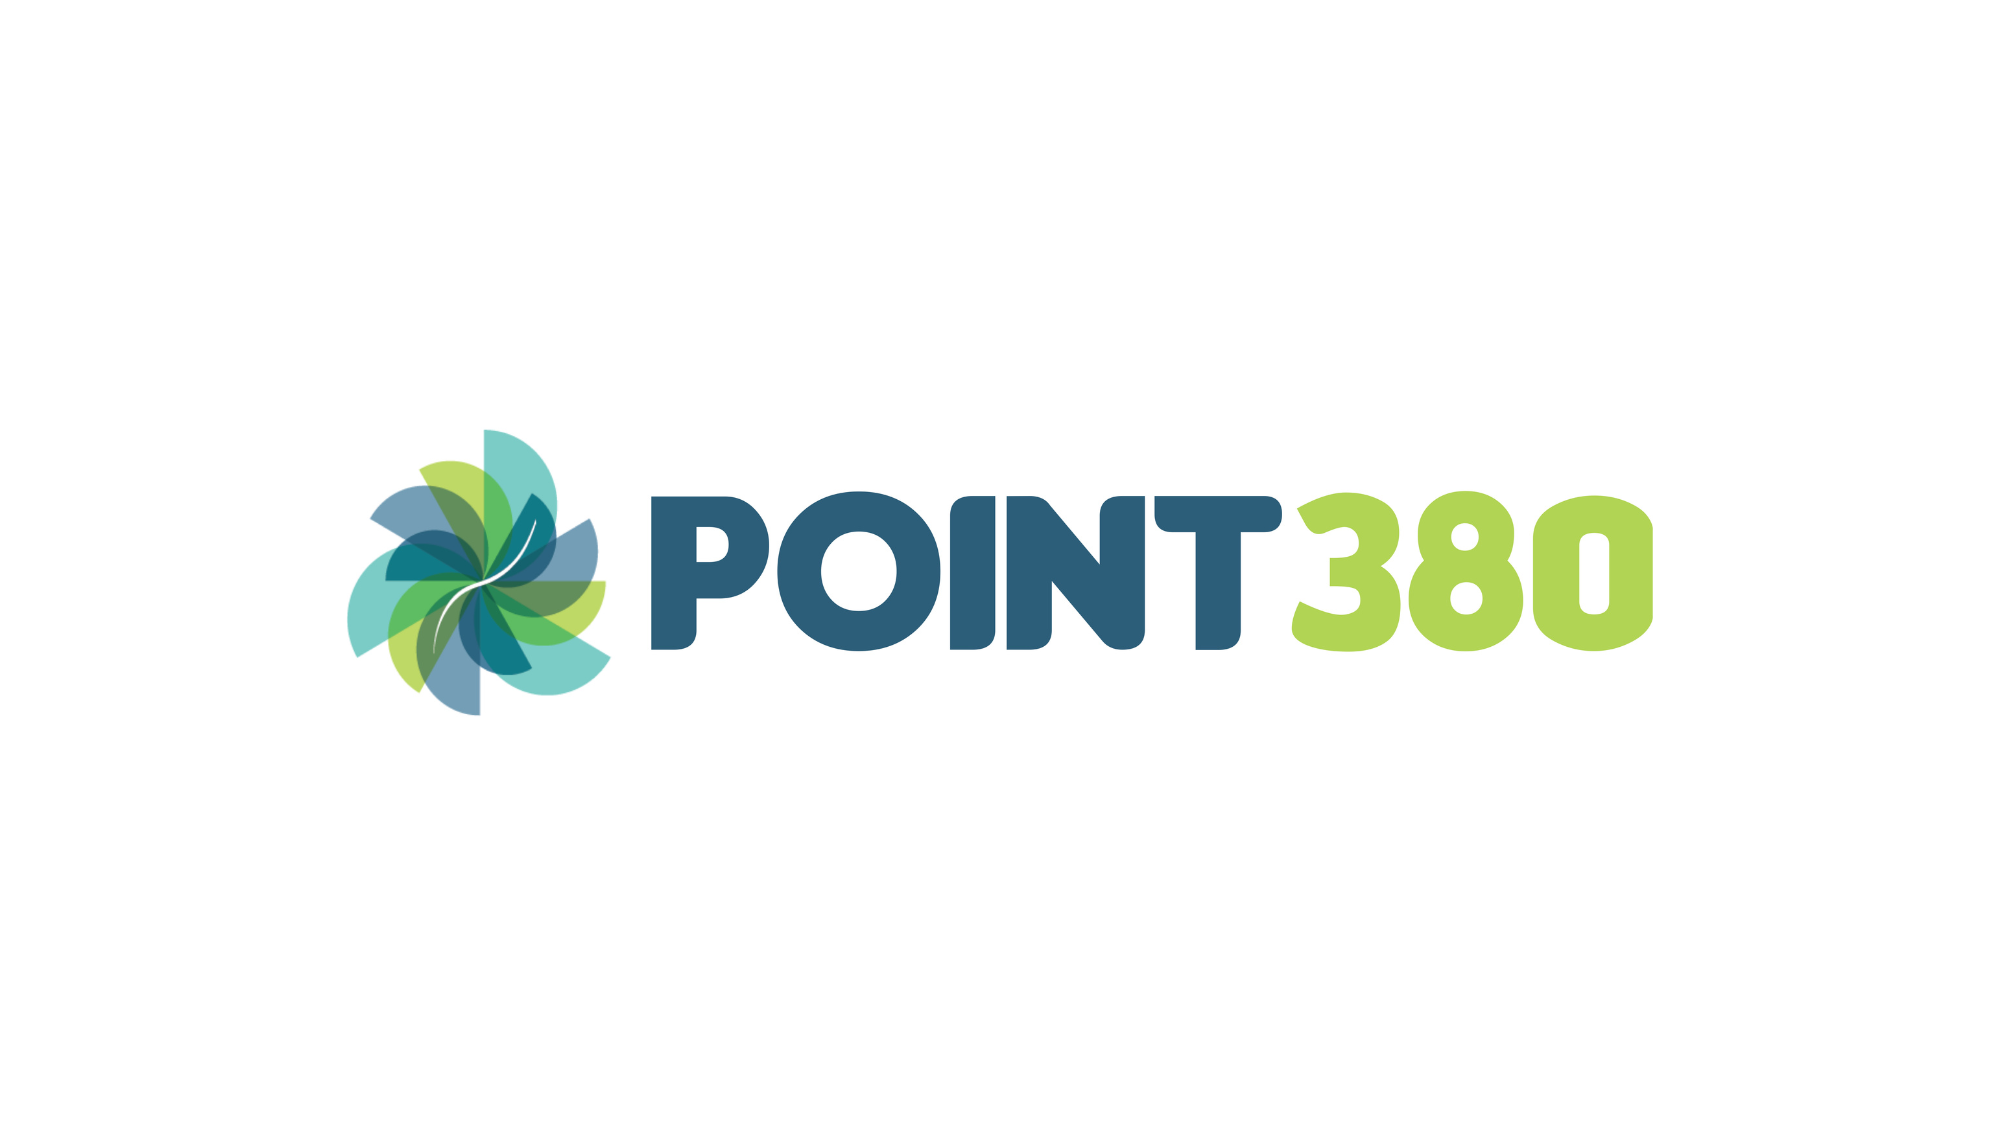 Logo features a green and blue pinwheel swirl, followed by the text Point380